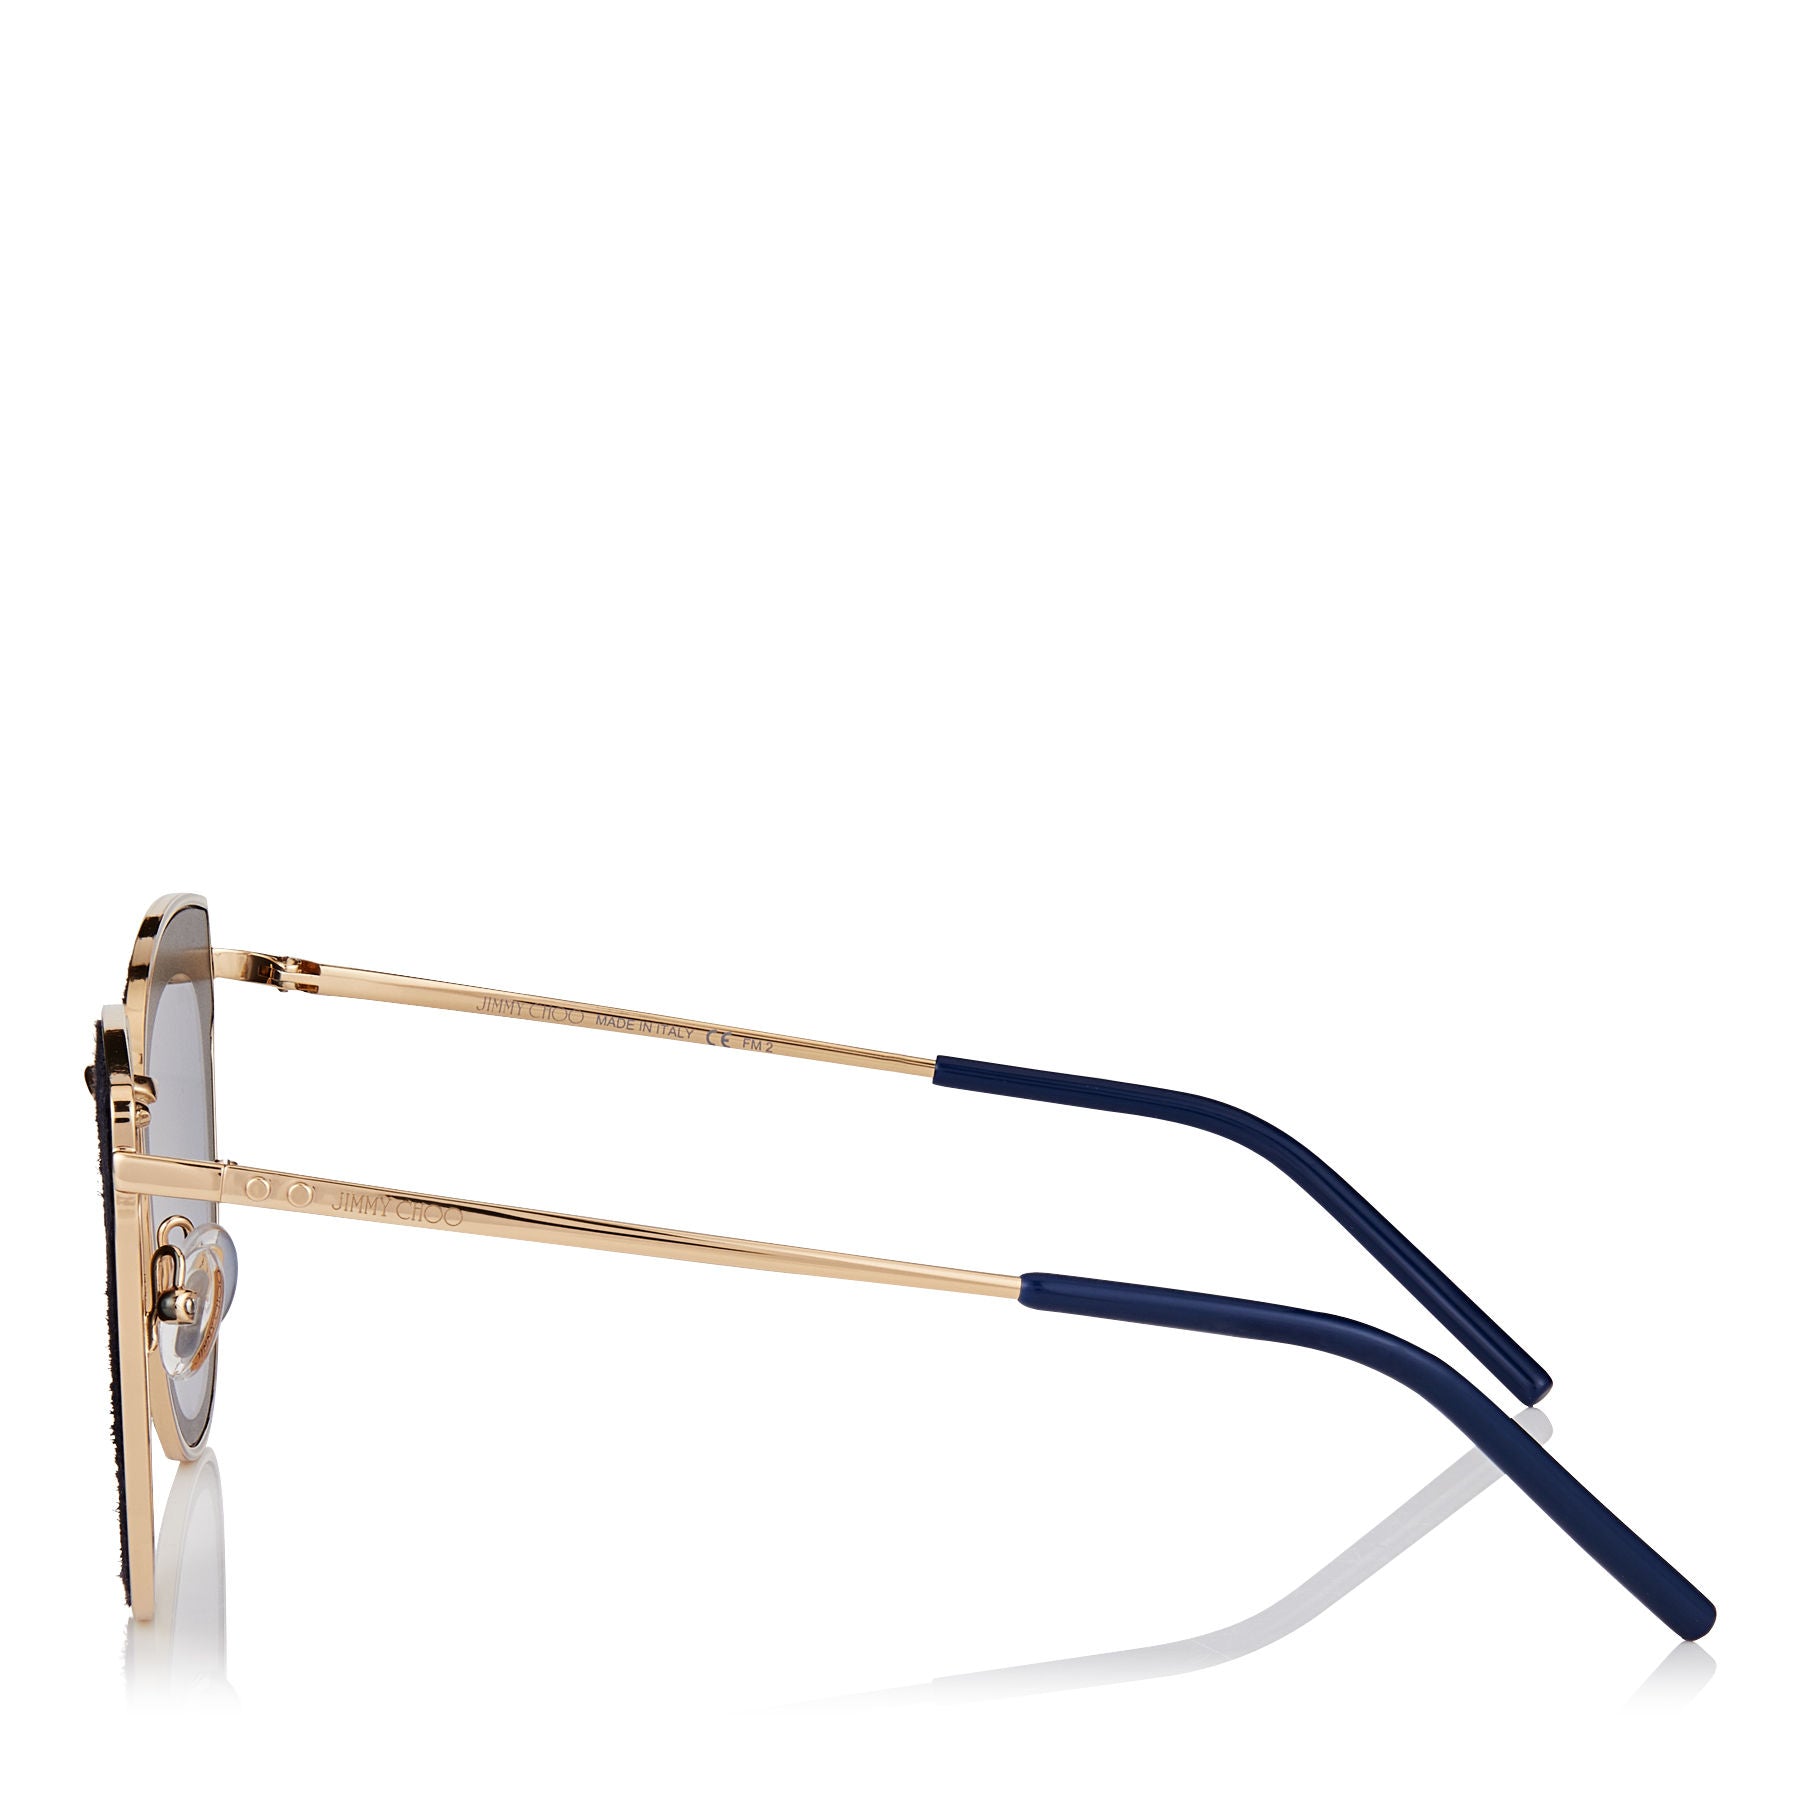 JIMMY CHOO Nile Rose Gold Metal Cat-Eye Sunglasses with Blue Leather Detailing ITEM NO. NILES63ELKS